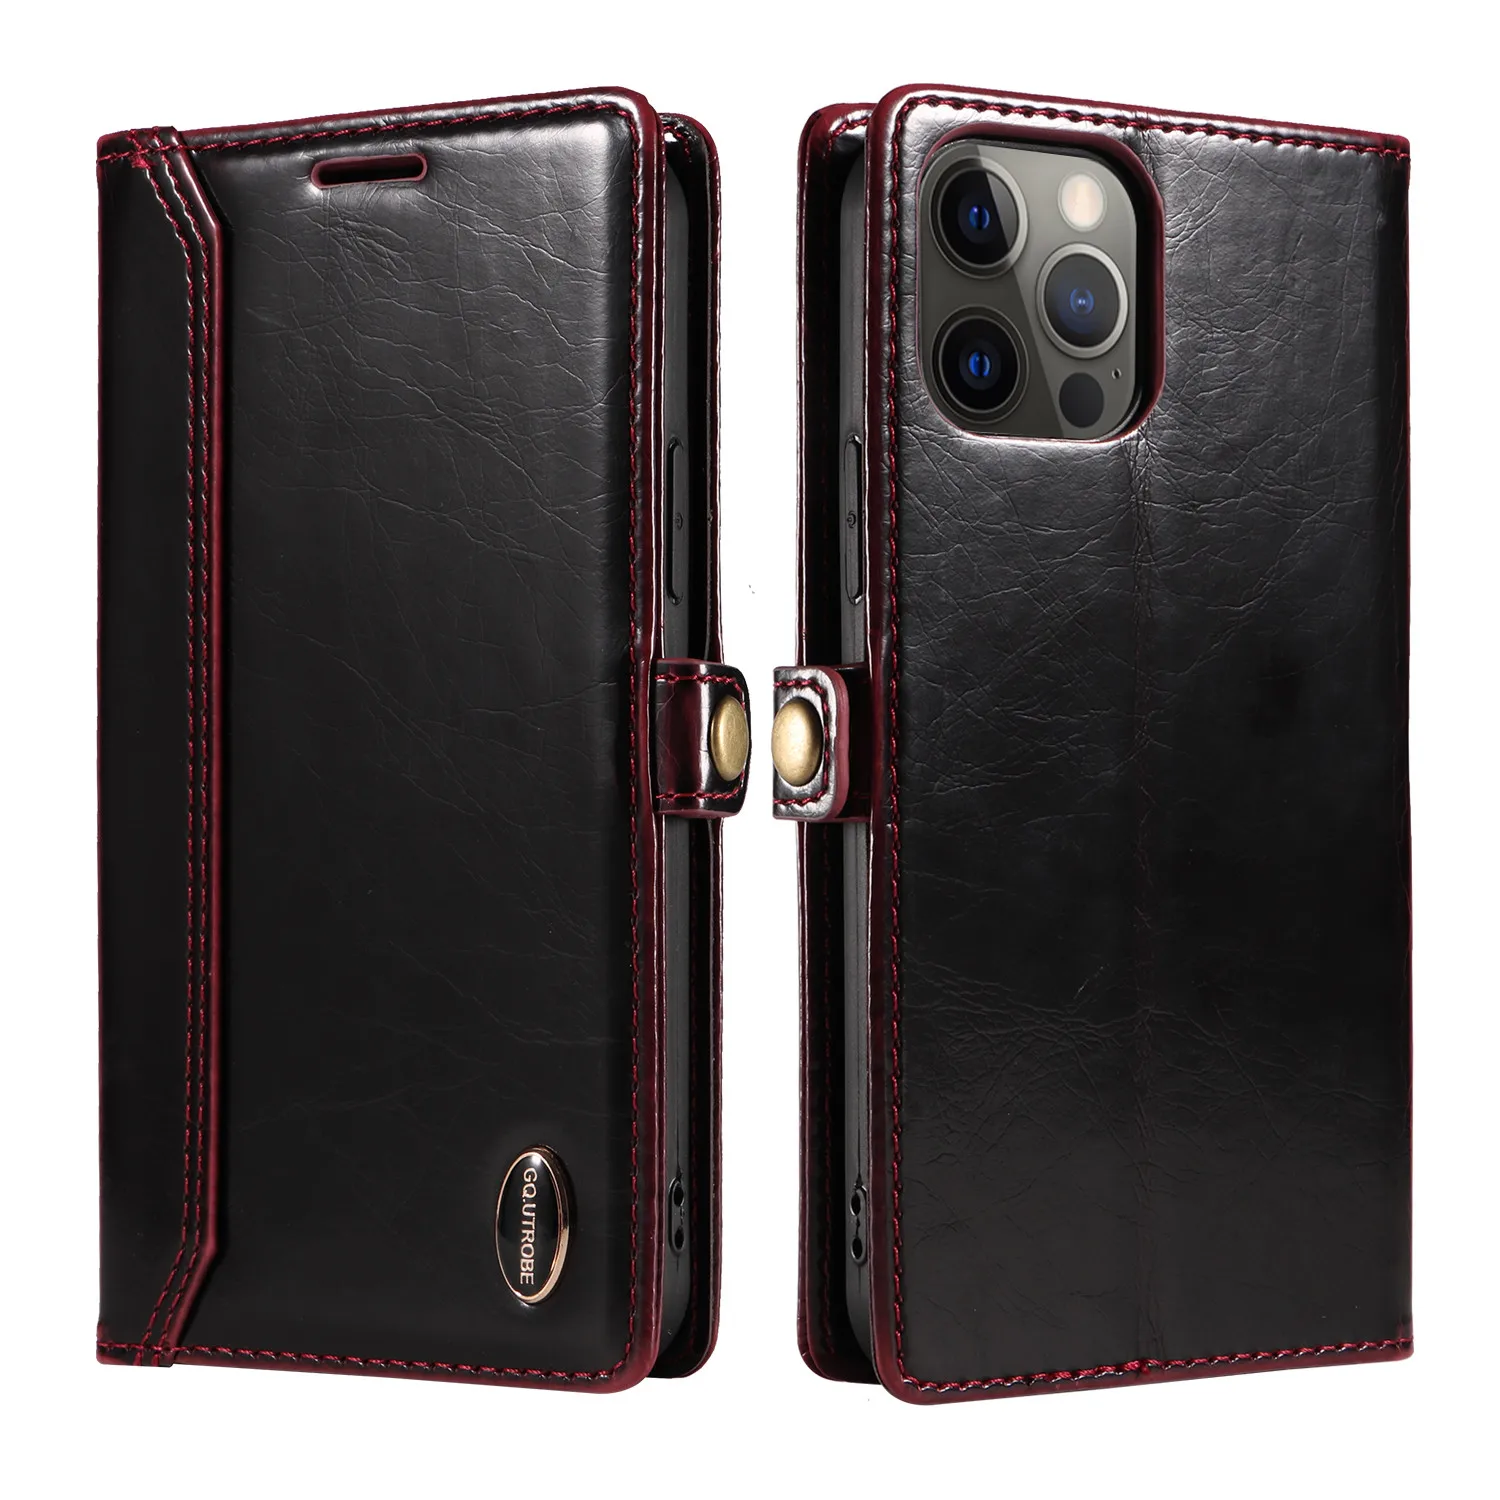 

Luxury Leather Flip Case For Xiaomi Redmi 10A 10C 9A 9T 9C Redmi Note 11S 10S 9 8T 7 Pro Wallet Card Slots Phone Bag Cover Coque